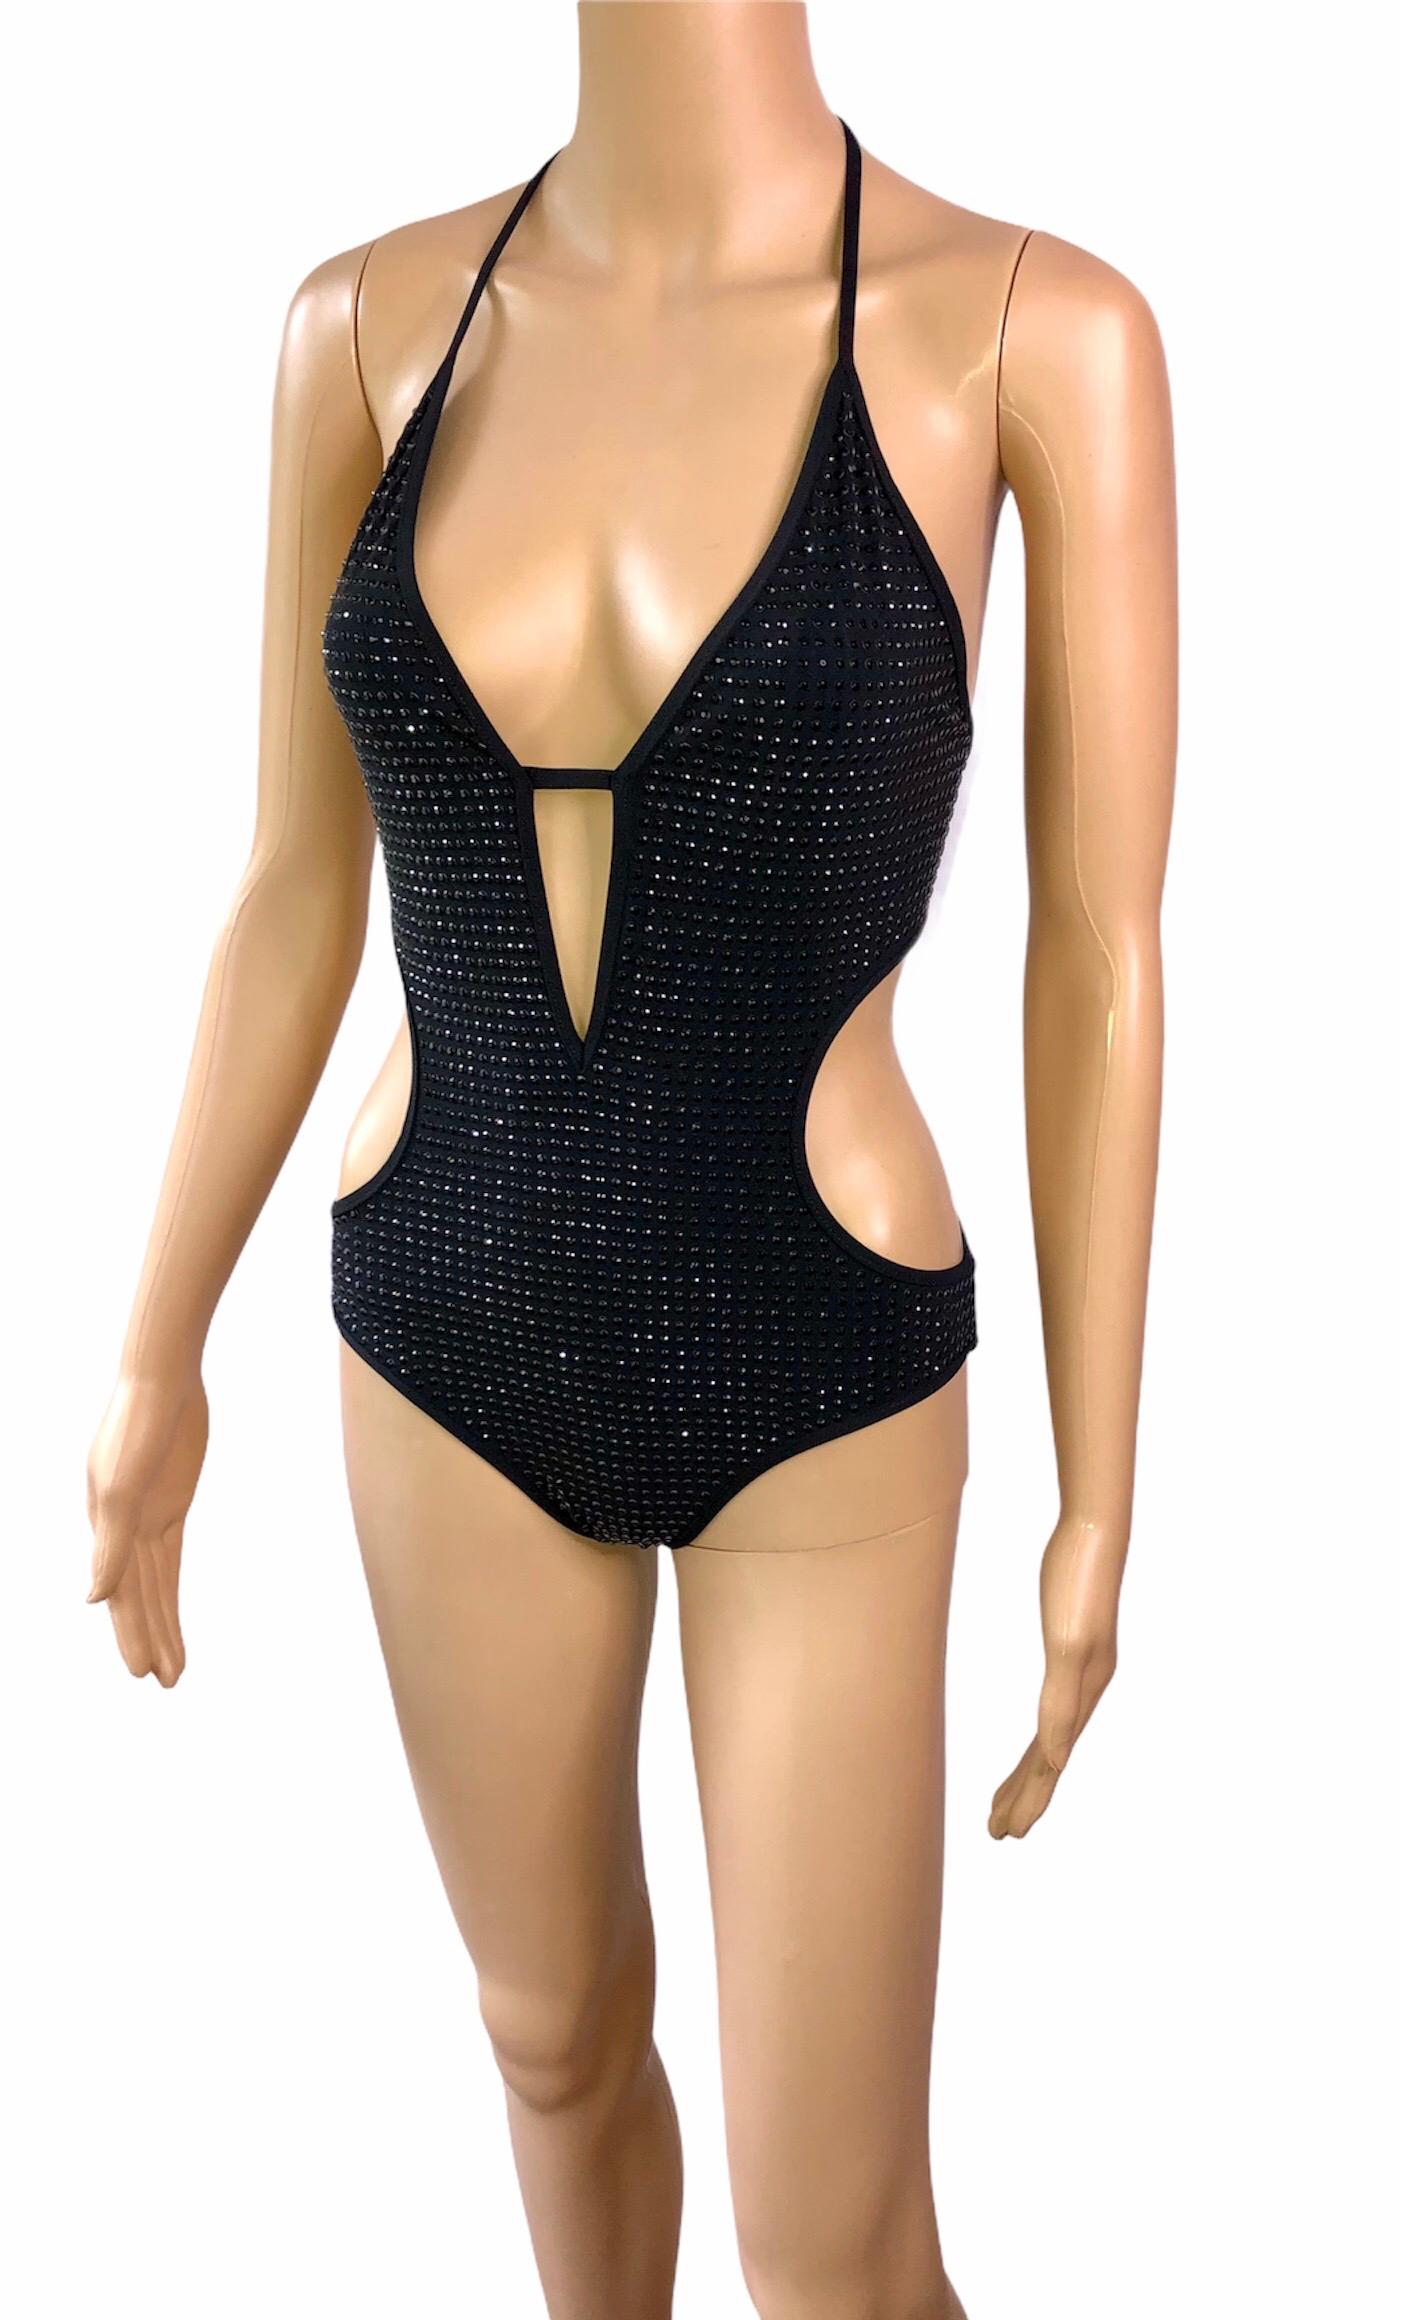 Gucci Crystal Embellished Cutout Black One Piece Bodysuit Swimsuit Swimwear In Excellent Condition For Sale In Naples, FL